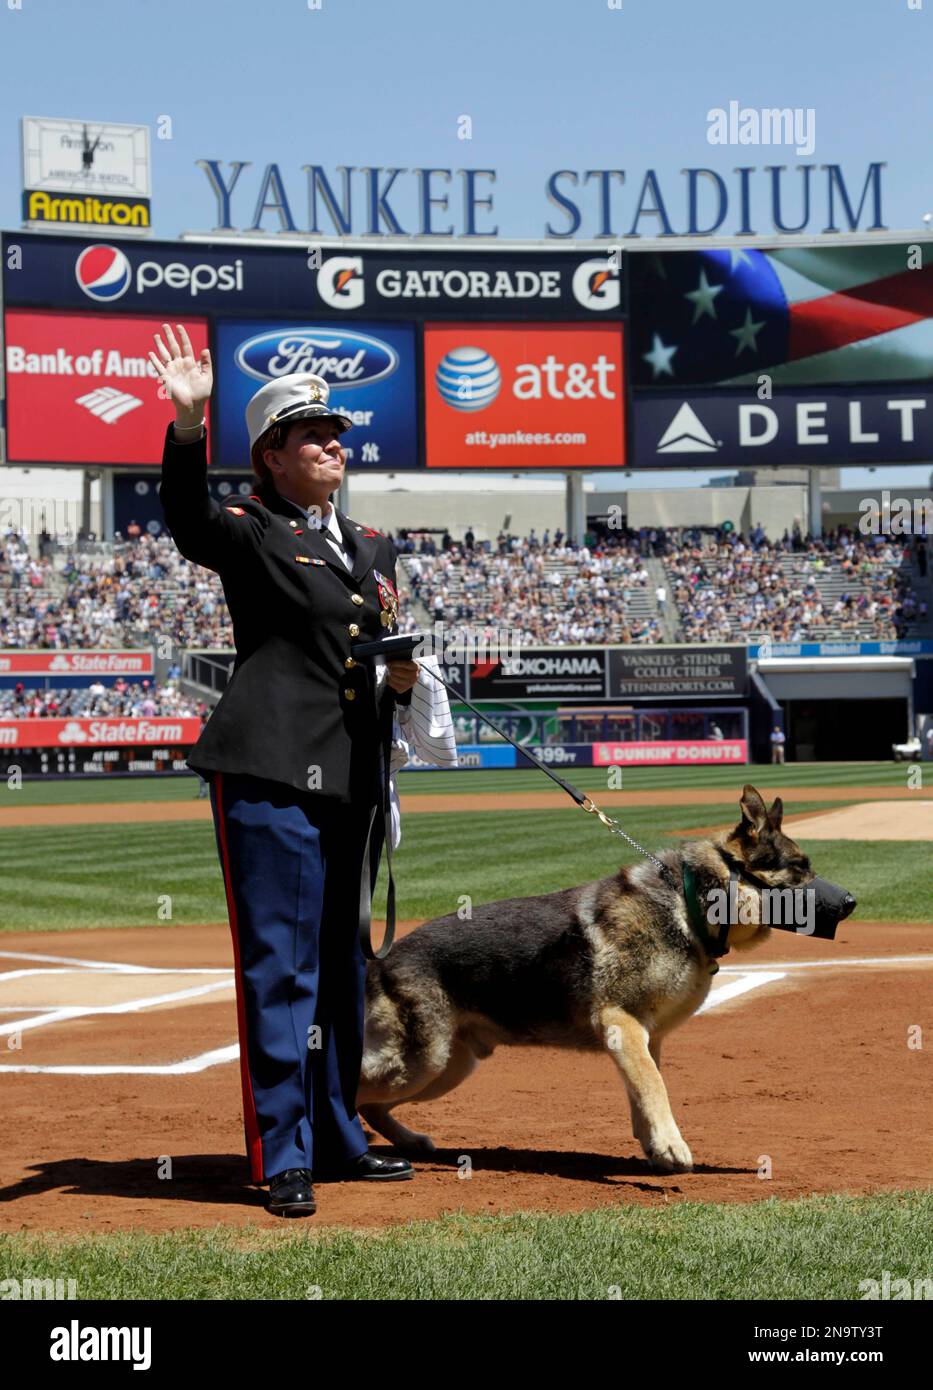 https://c8.alamy.com/compfr/2n9ty3t/former-marine-cpl-and-purple-heart-recipient-megan-leavey-and-combat-dog-sgt-rex-participate-in-a-ceremony-before-a-baseball-game-between-the-new-york-yankees-and-the-seattle-mariners-at-yankee-stadium-in-new-york-sunday-may-13-2012-through-two-tours-of-duty-in-iraq-sgt-rex-was-by-leaveys-side-the-pair-worked-more-than-100-missions-searching-for-roadside-bombs-were-injured-in-the-line-of-duty-and-went-through-physical-therapy-together-after-five-years-of-waiting-for-rexs-service-to-end-and-filling-out-paperwork-leavey-finally-won-approval-to-bring-the-11-year-old-german-shepherd-h-2n9ty3t.jpg